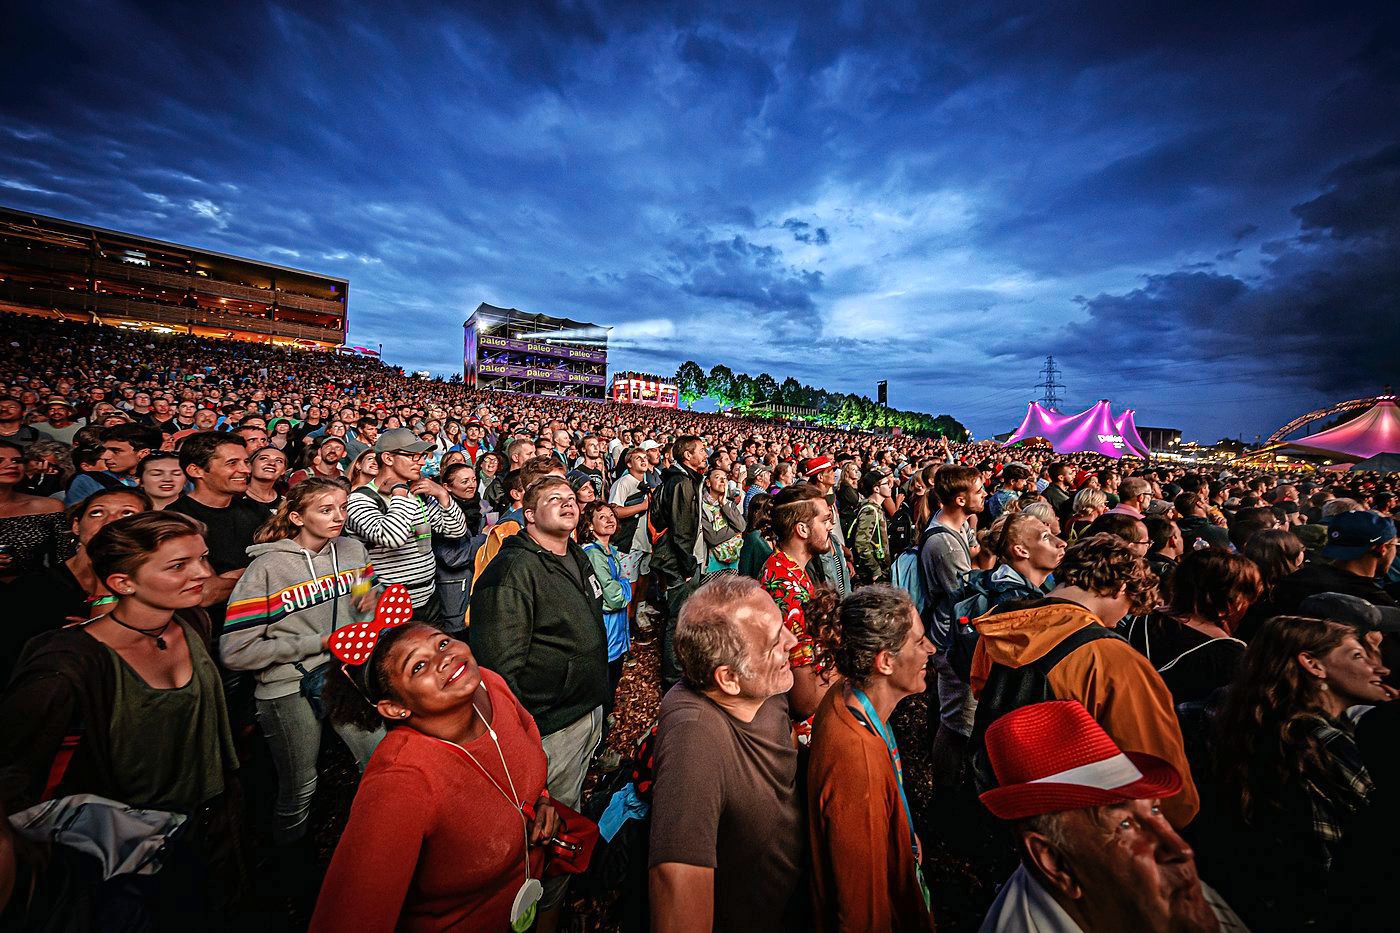 Festival goers watch Swiss humorists Vincent Kucholl and Vincent Veillon (not pictured) perform their show "Le Fric" on the main stage, during the 44th edition of the Paleo Festival, in Nyon, Switzerland, Thursday, July 25, 2019. The Paleo is a open-air music festival in the western part of Switzerland welcoming approximately 230'000 spectators over six days and takes place from July 23rd to July 28th. (KEYSTONE/Valentin Flauraud) SCHWEIZ PALEO FESTIVAL 2019